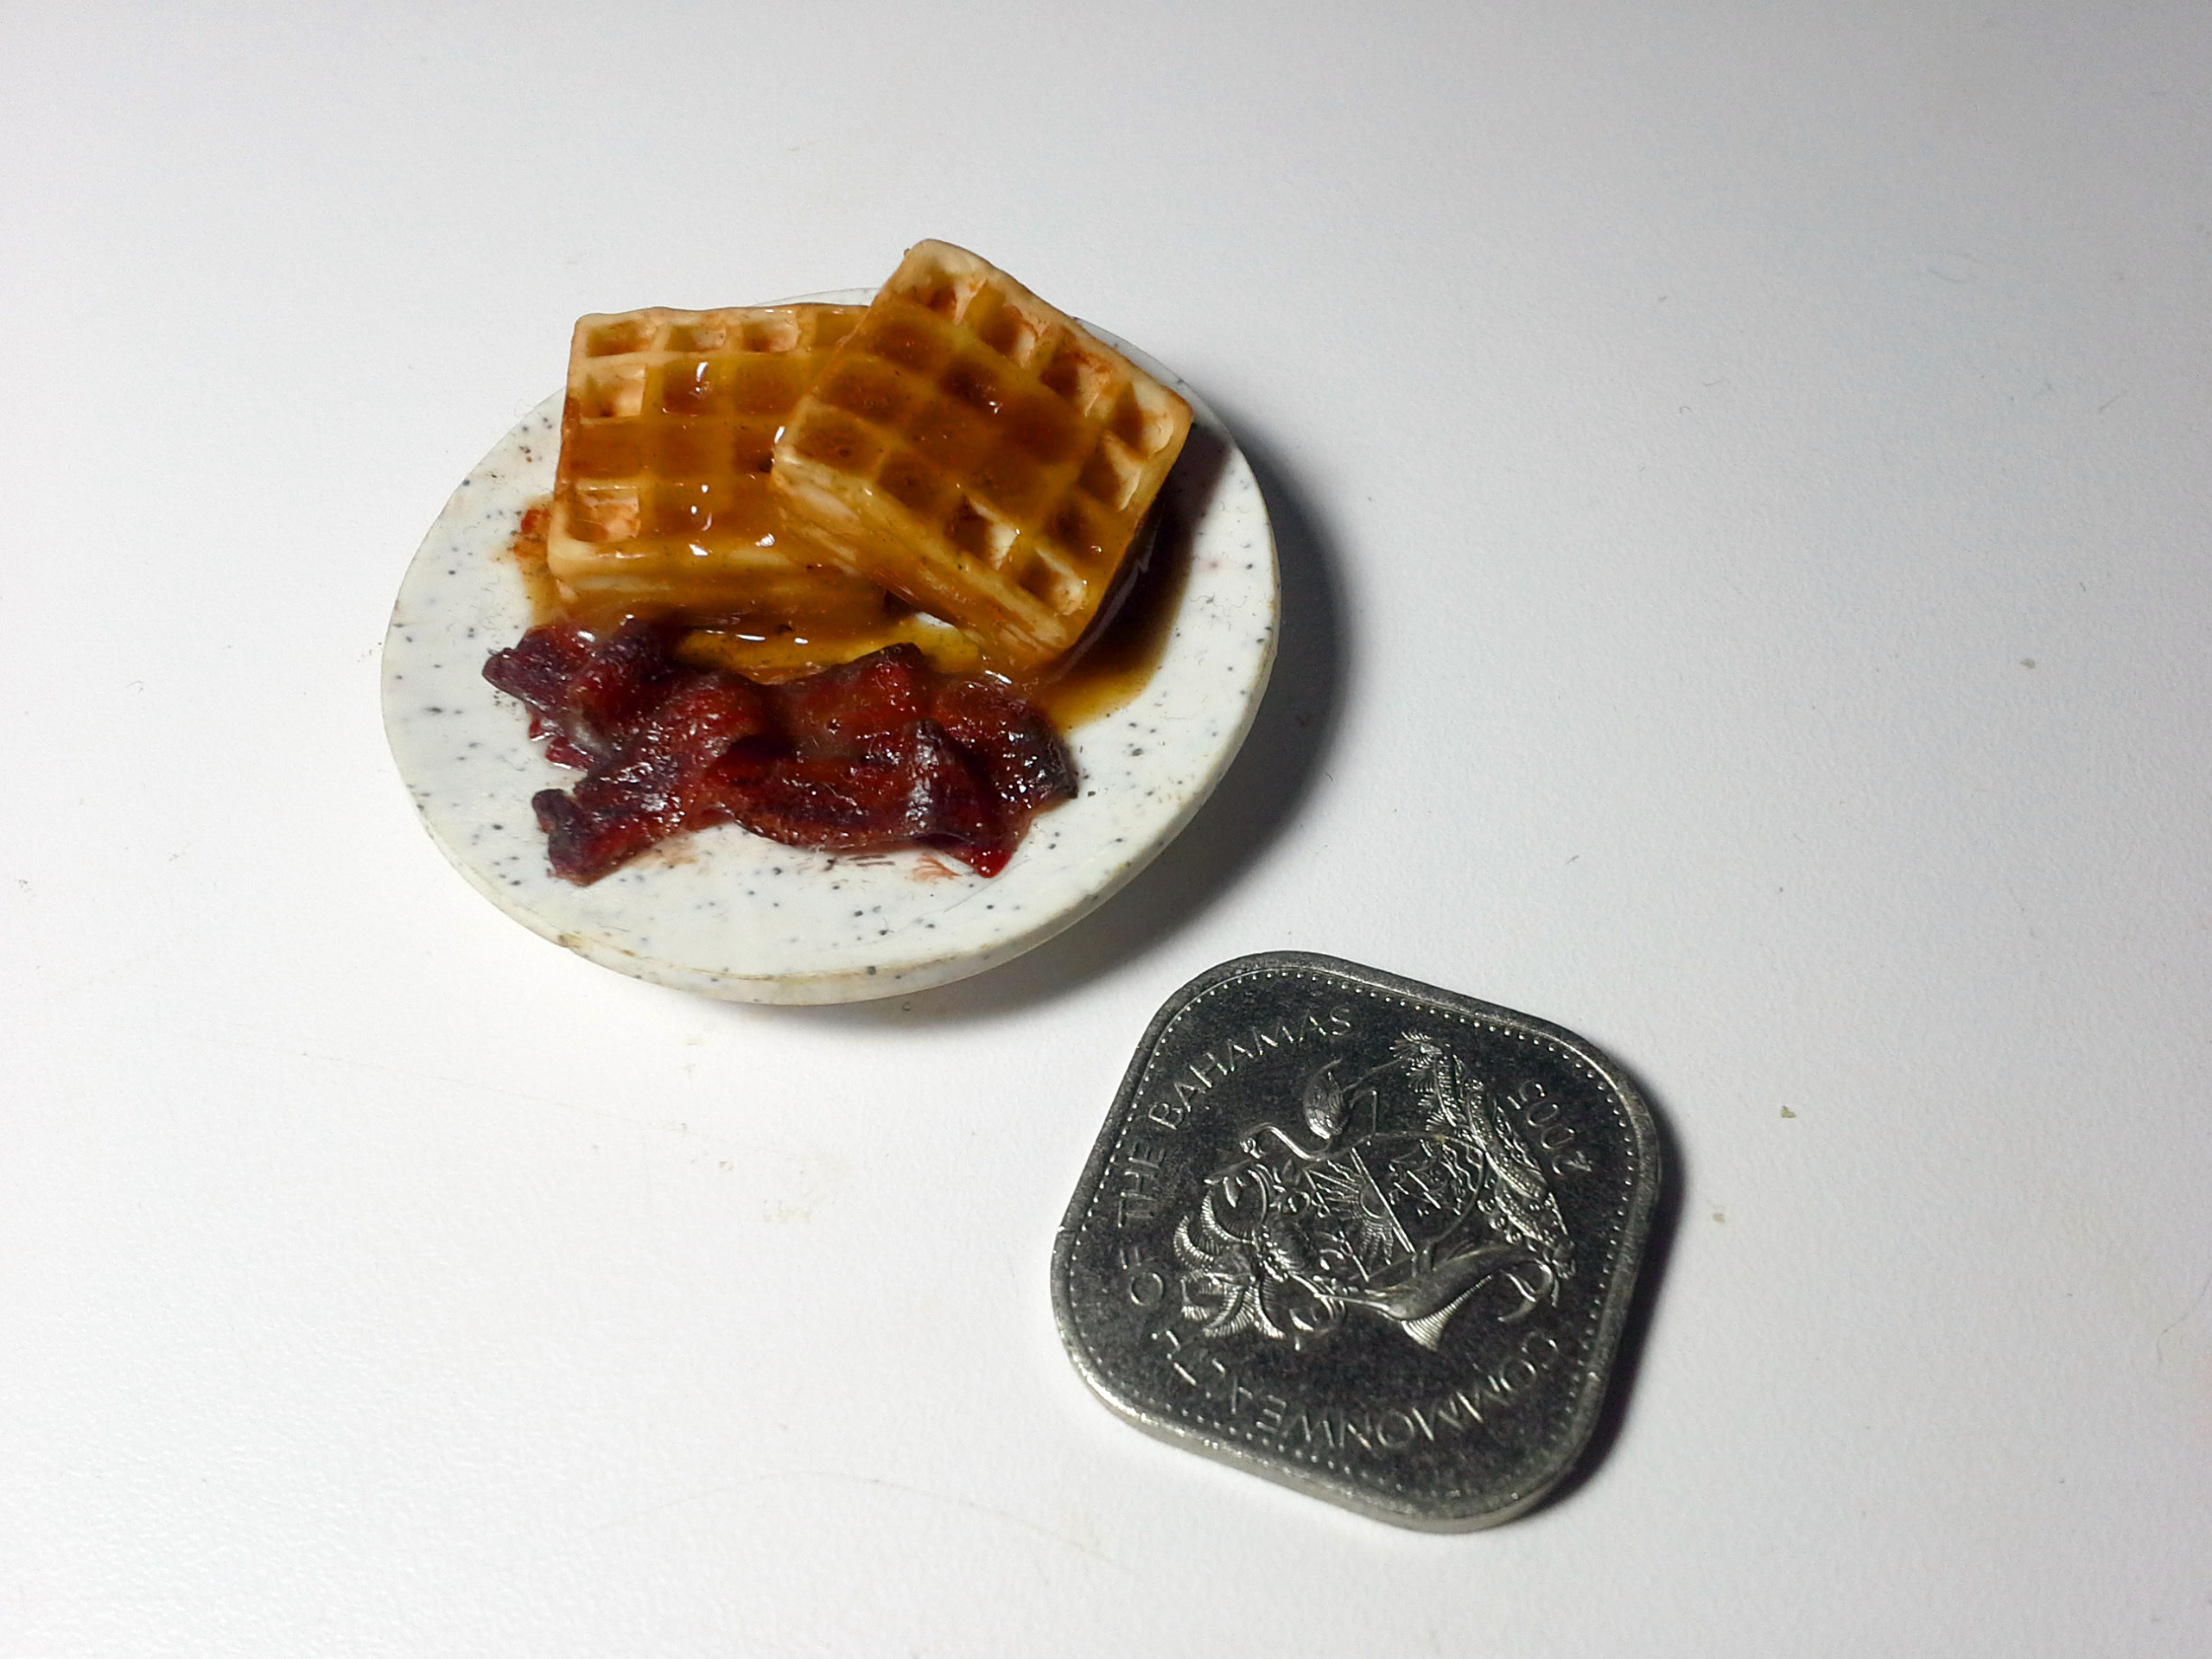 Miniature waffles and bacon